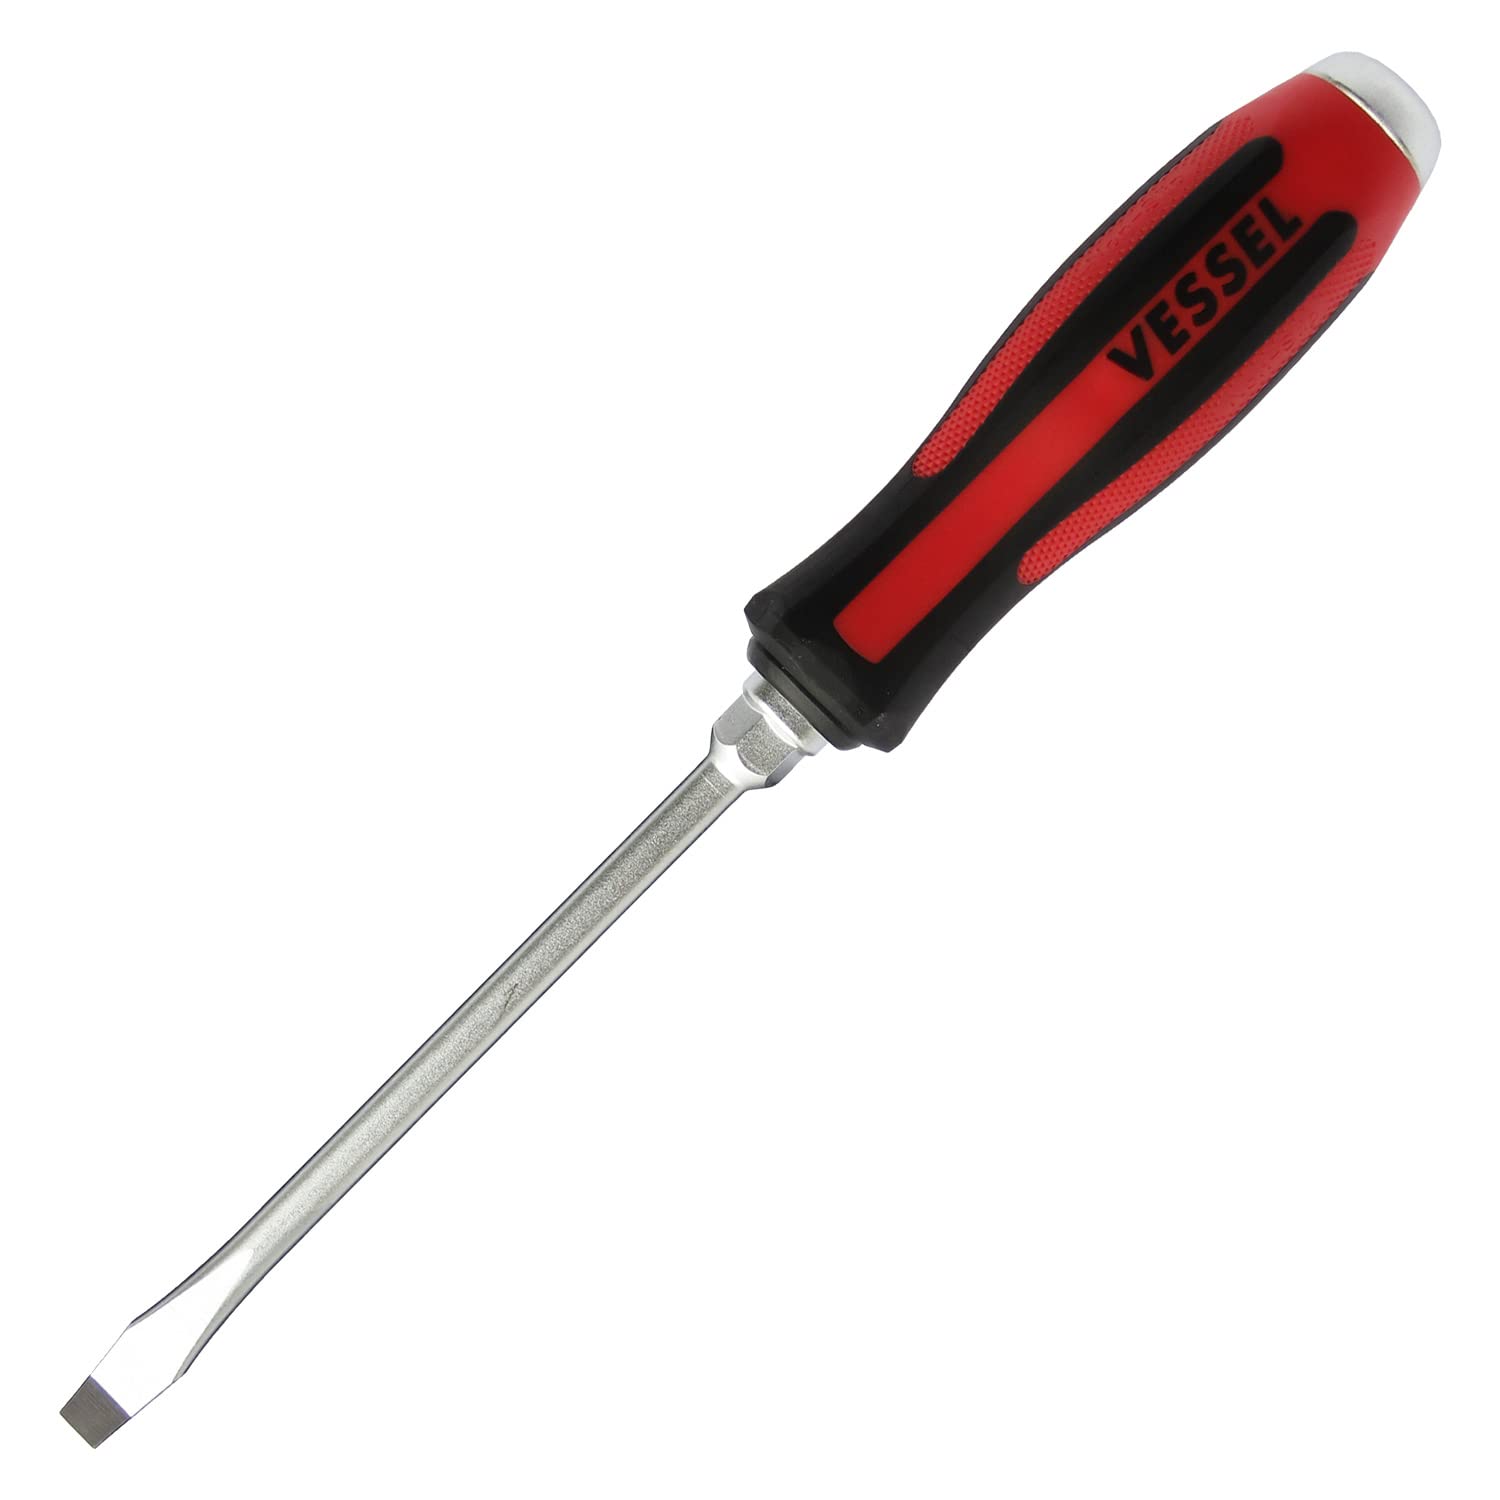 be cell (VESSEL) mega gong hand-impact screwdriver -8×150 930